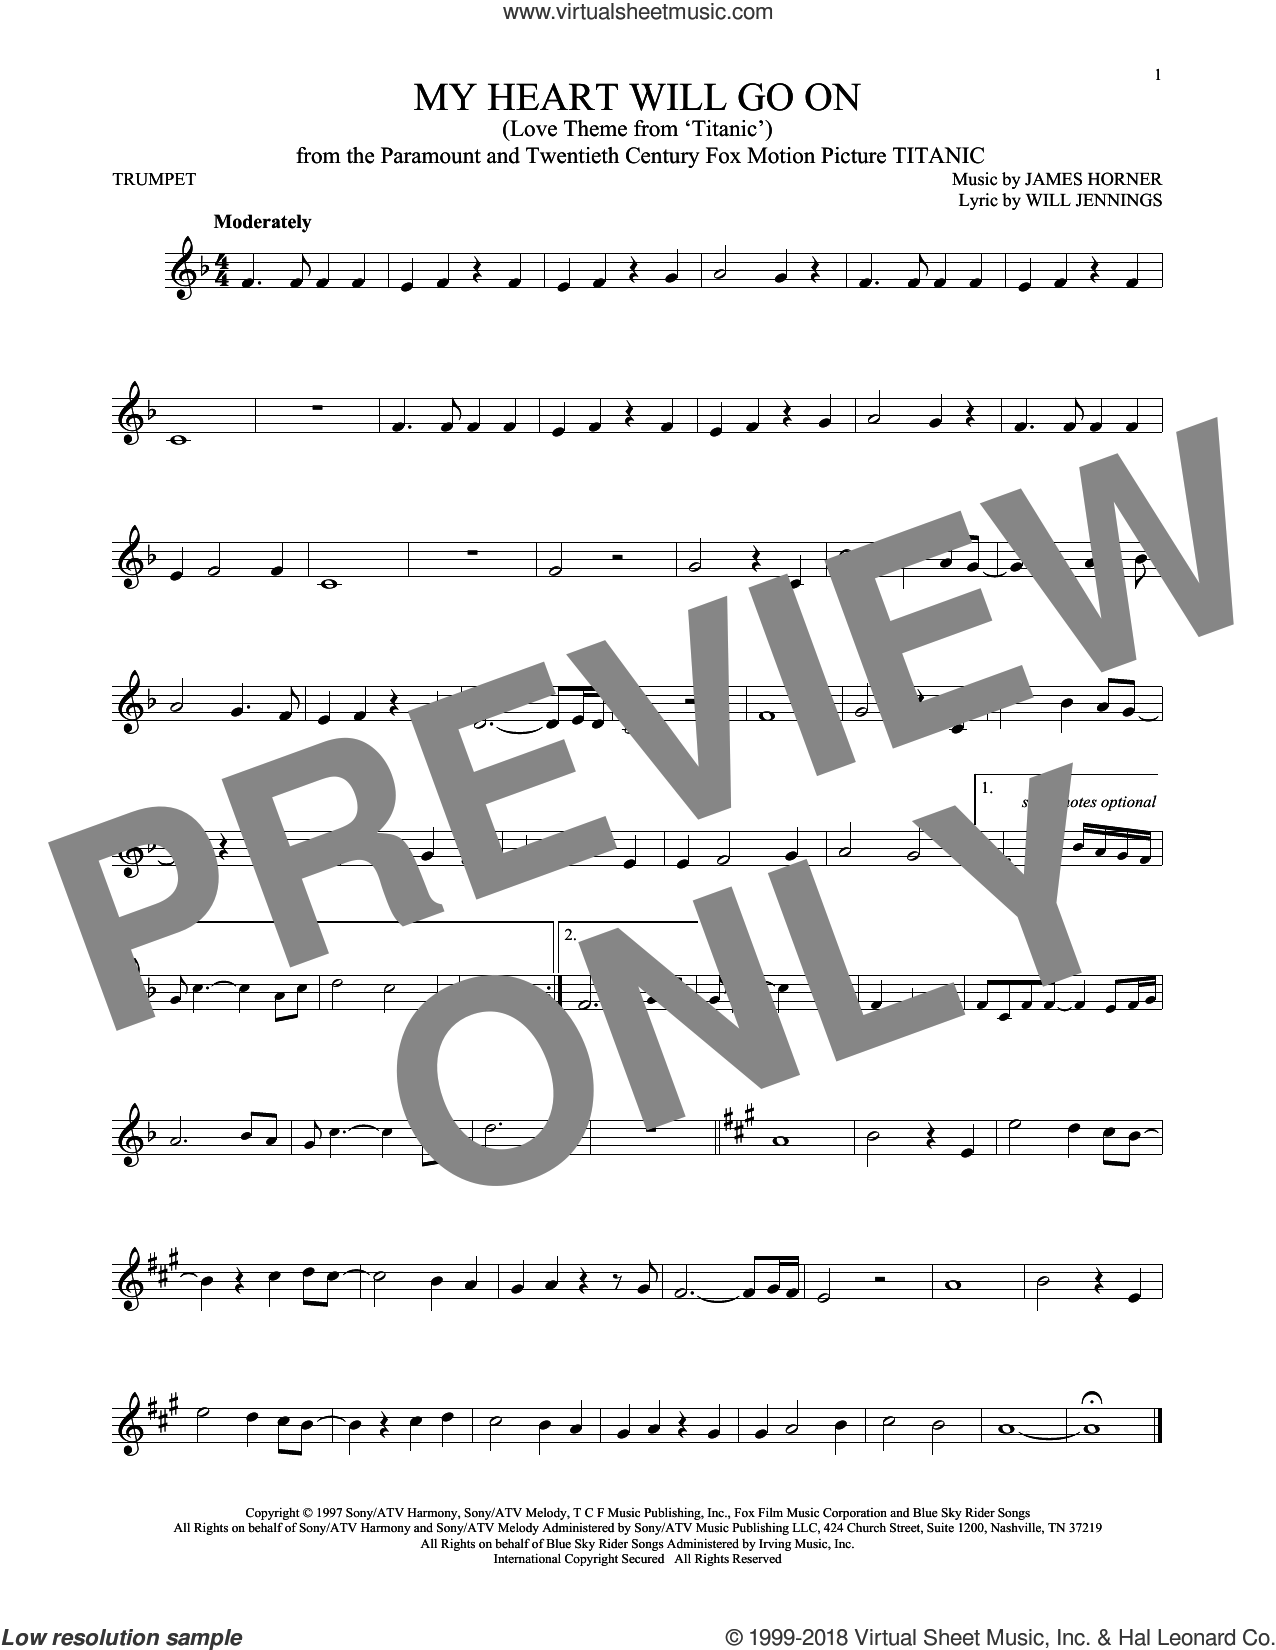 My Heart Will Go On (Love Theme From Titanic) sheet music for trumpet solo